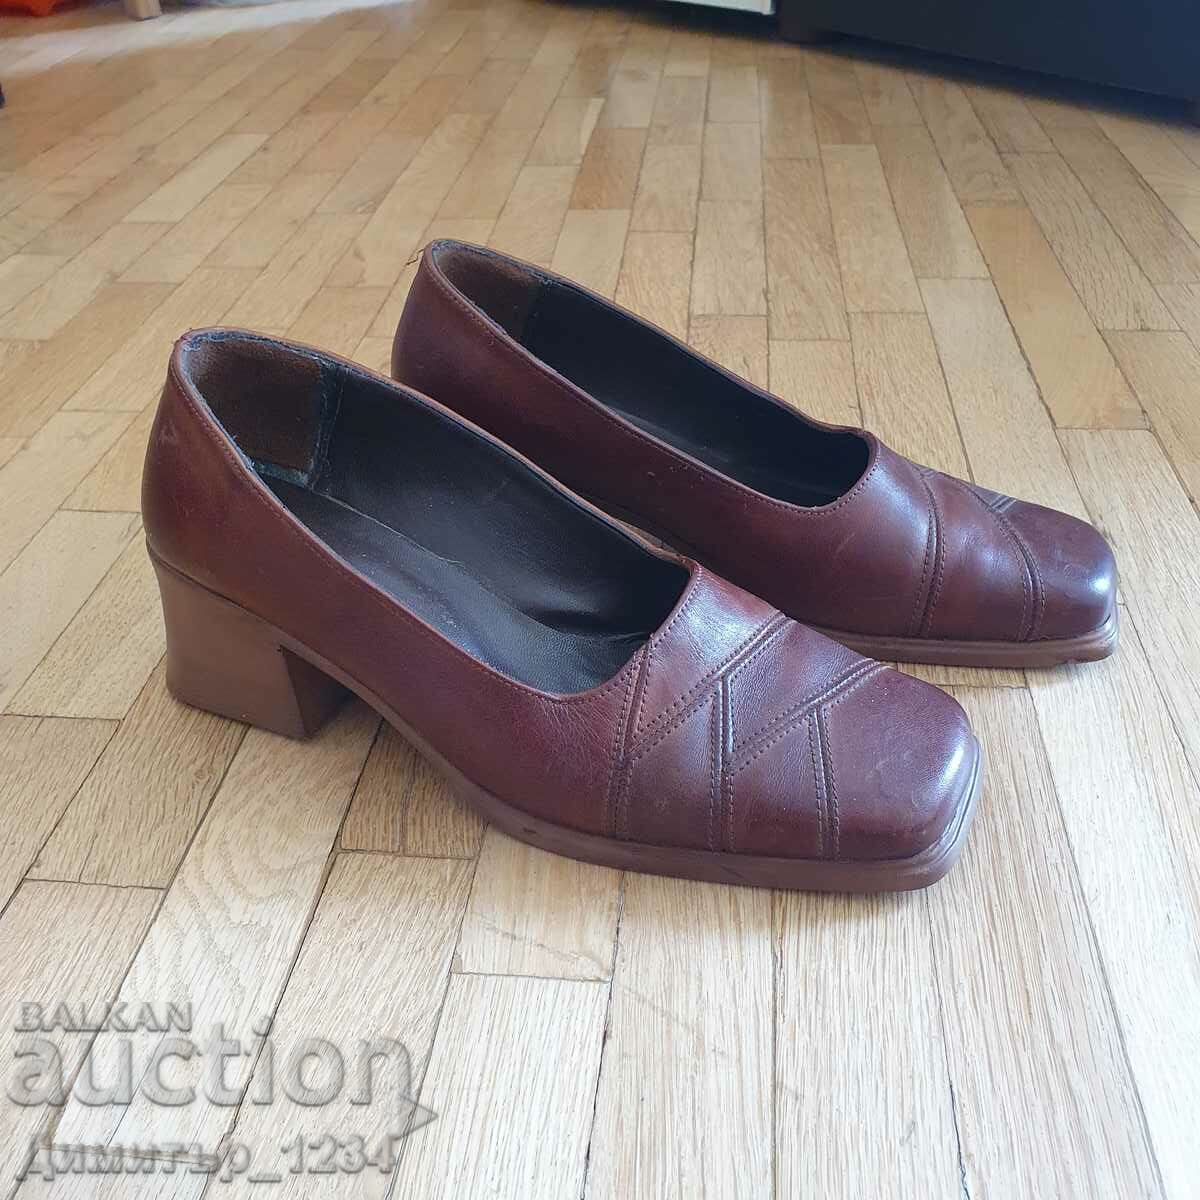 Women's shoes with heels made of natural leather